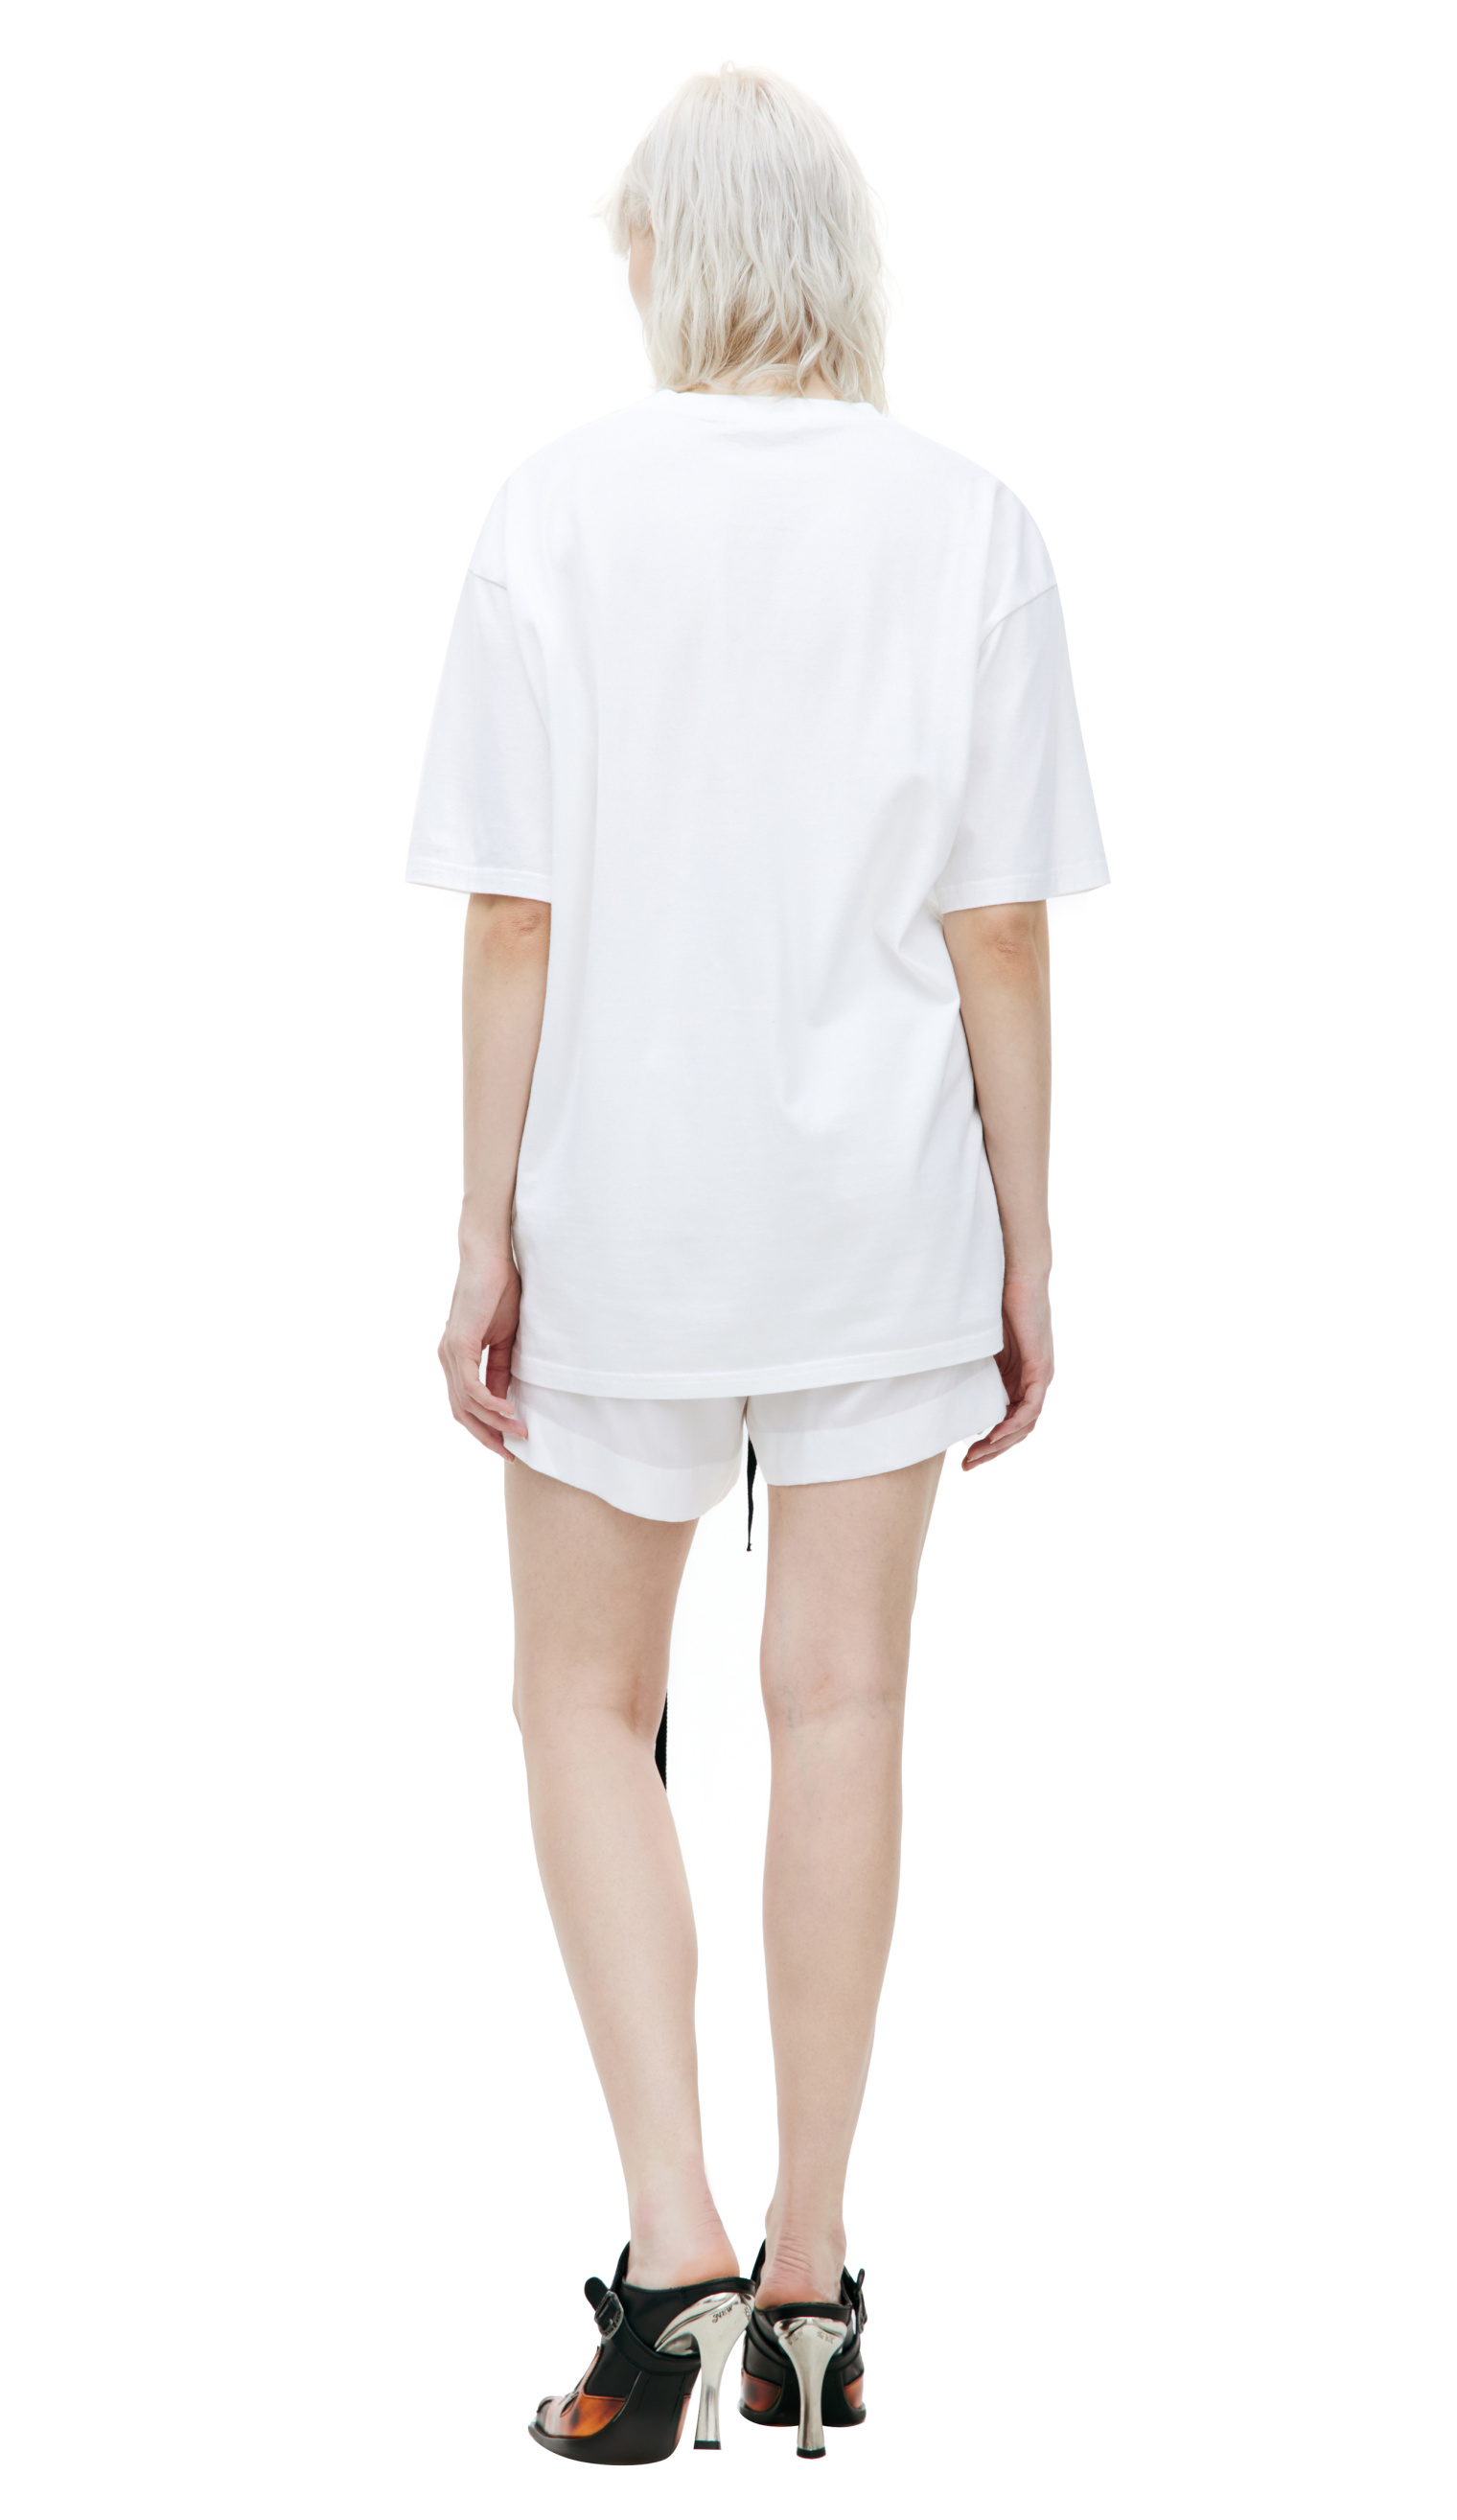 Undercover White printed t-shirt